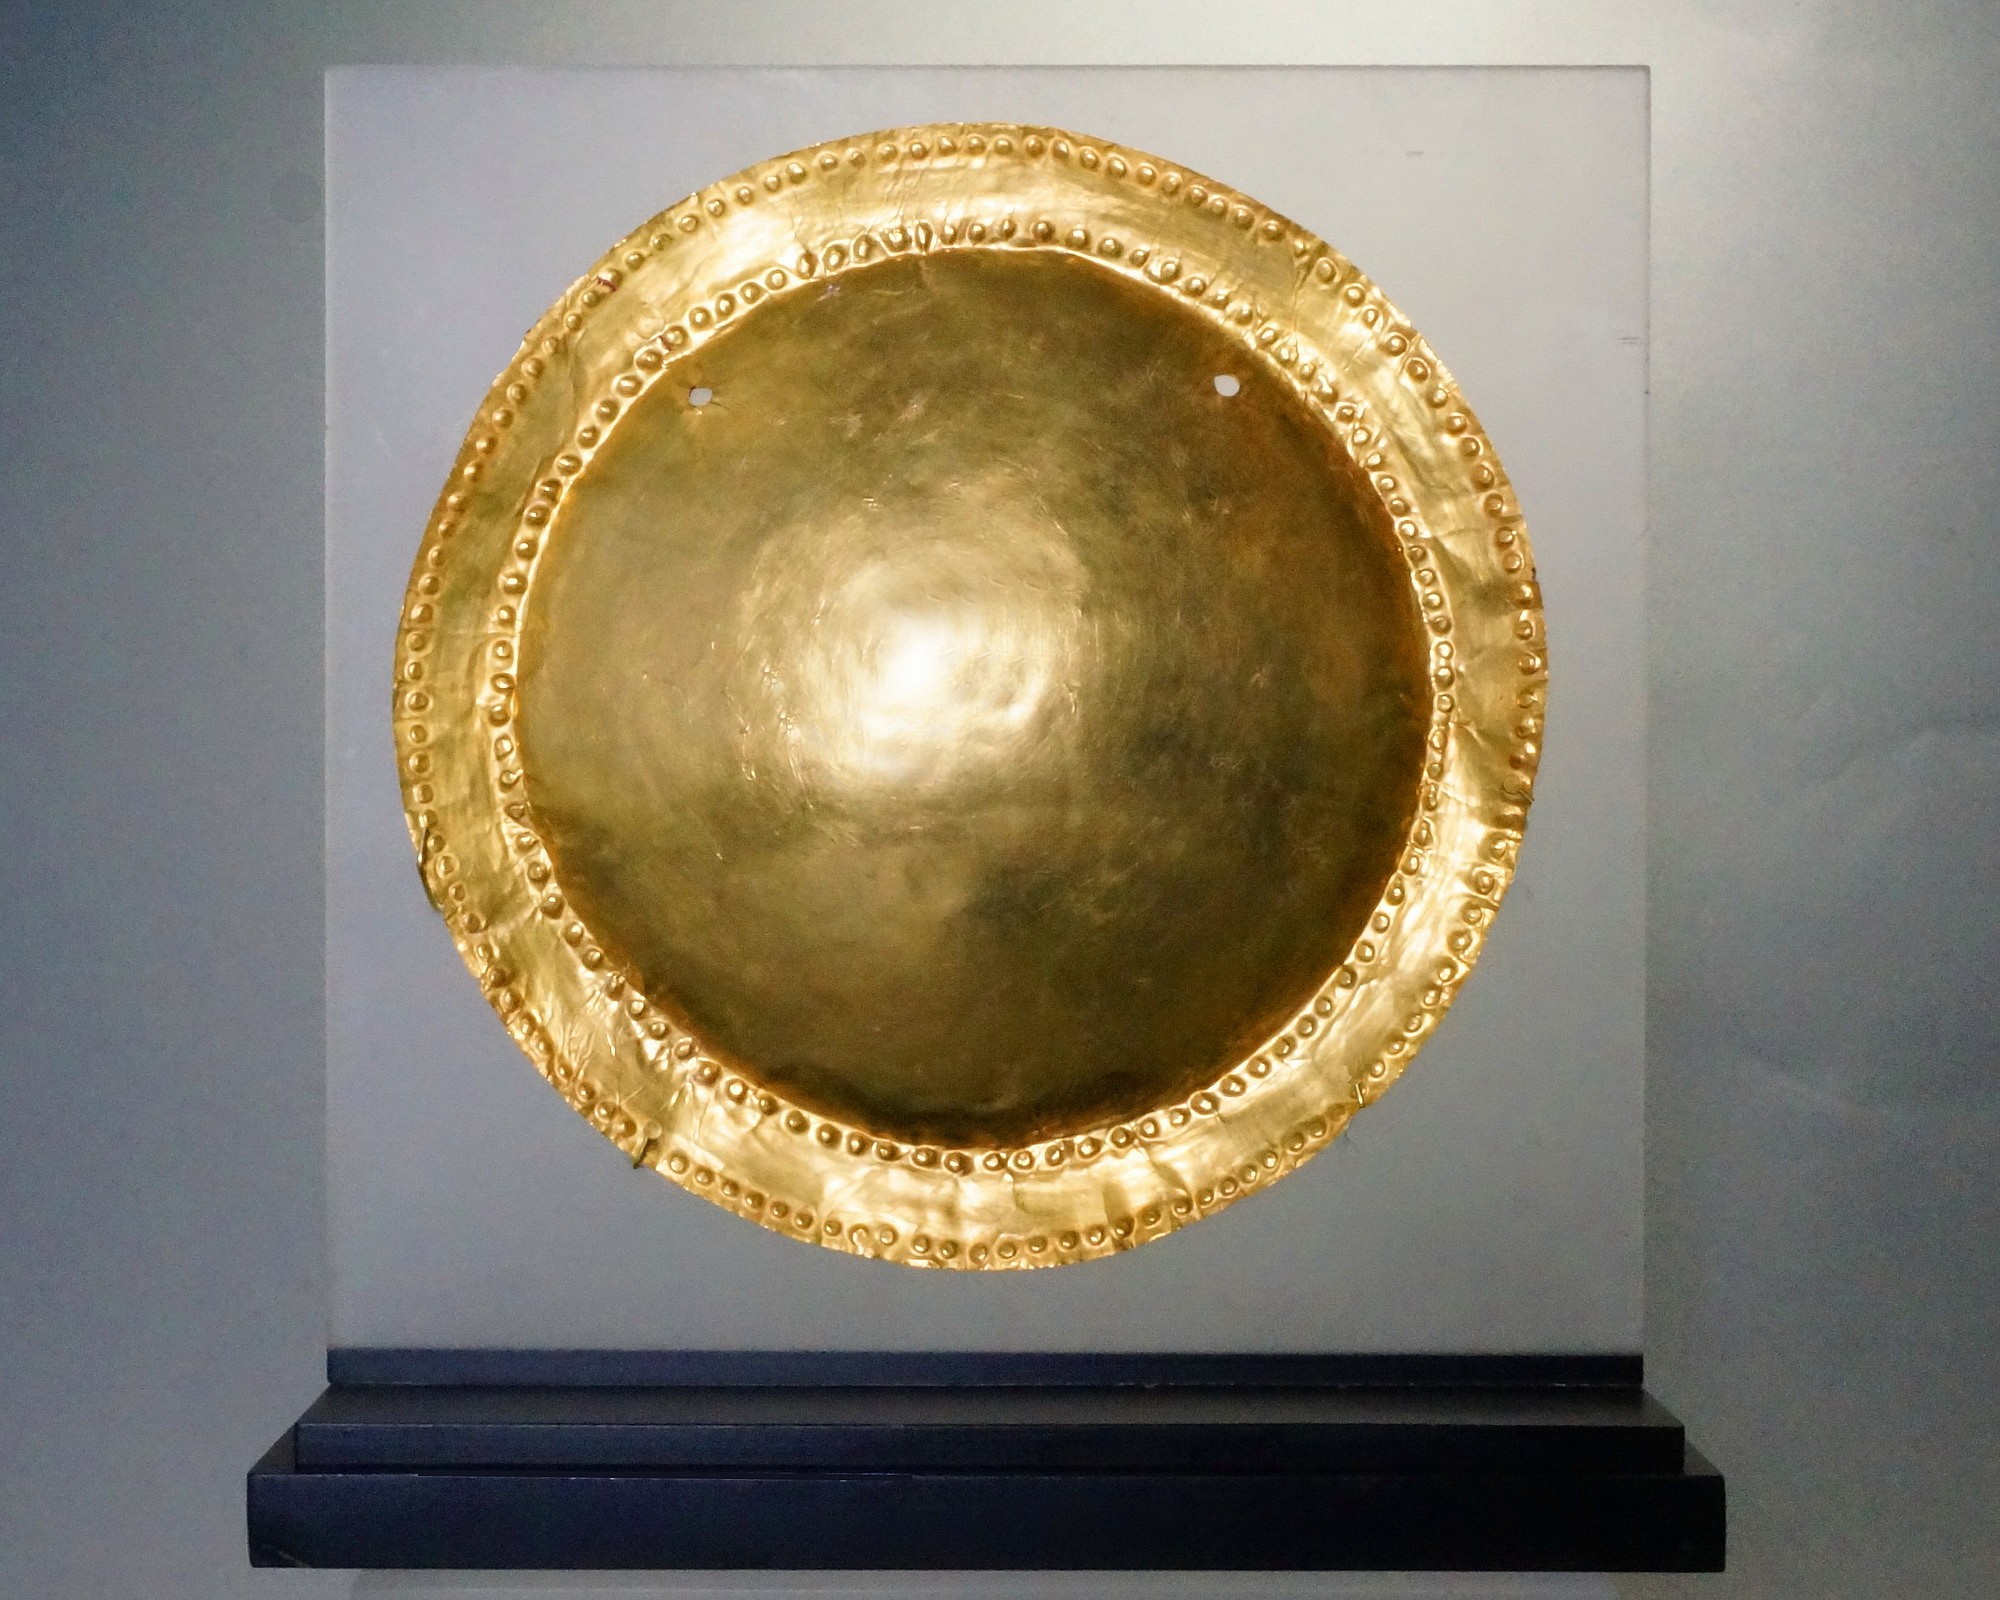 Panama, Macaracas (Cocle) Circular Gold Disc With Concave Center
The disc is embellished with two bands of small bosses on the narrow rim.  There is a pair of suspension holes.   On Columbus’ 4th voyage off the coast of Panama, he and his men saw Indians wearing "Mirrors of gold." Illustrated in THE ART OF PRECOLUMBIAN GOLD, p. 119. Ex New York collector, prior to 1970.
Media: Metal
Dimensions: Diameter 5 3/8"     24.6 Weight: grams
&bull;SOLD
n7058